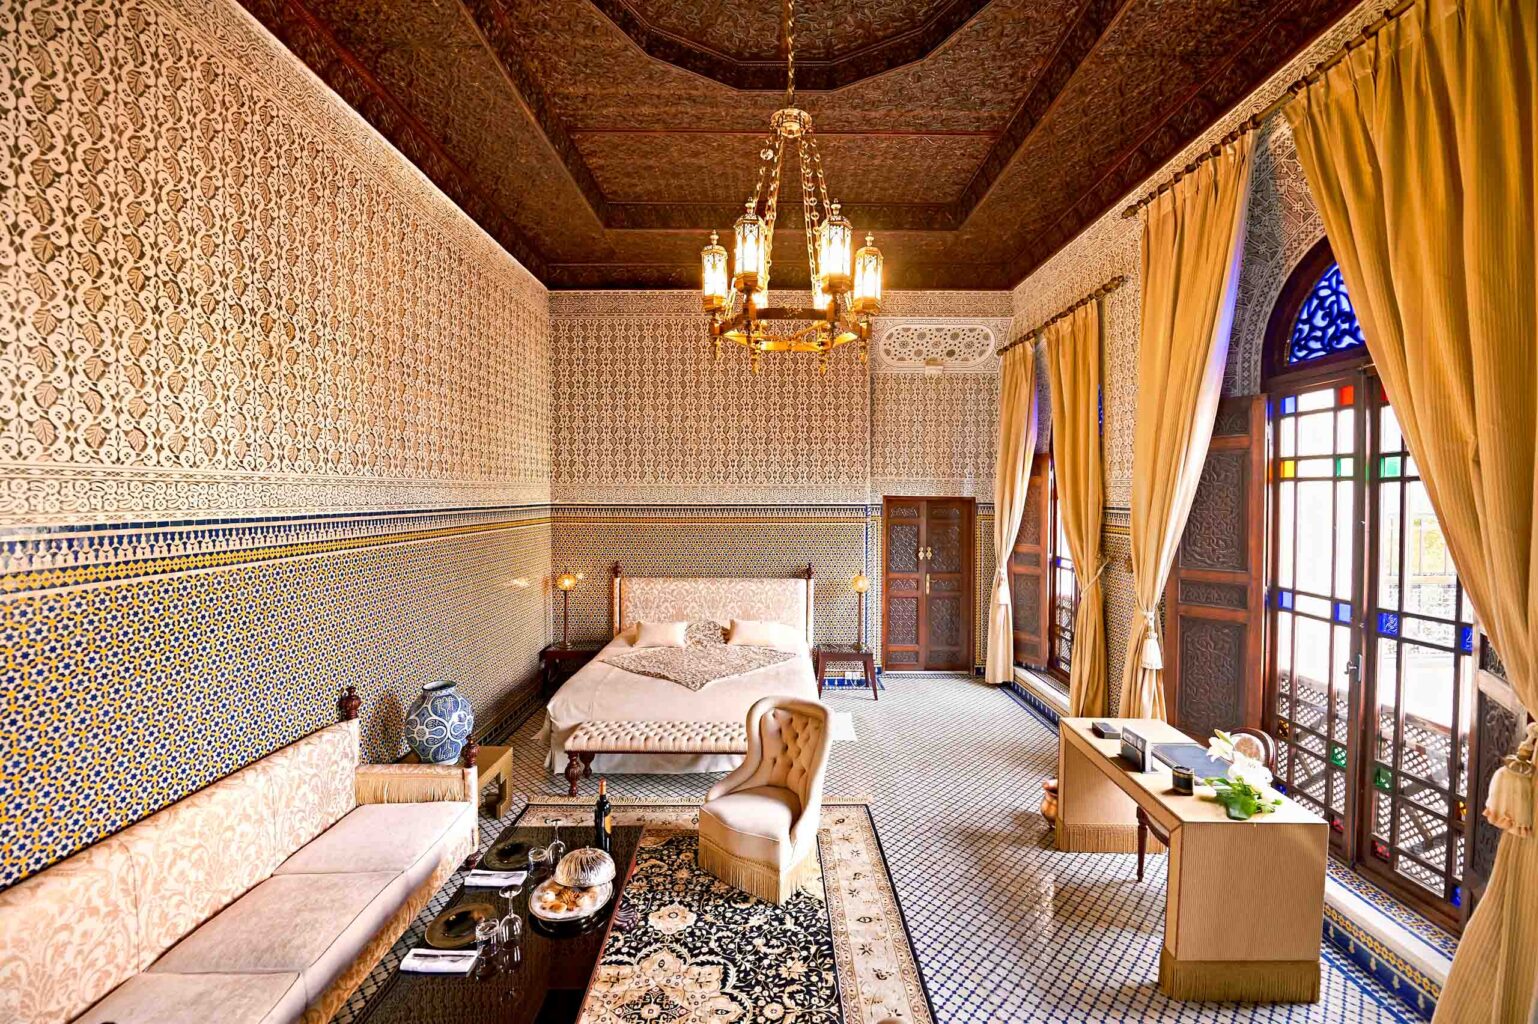 Luxurious riad hotel room in Morocco.